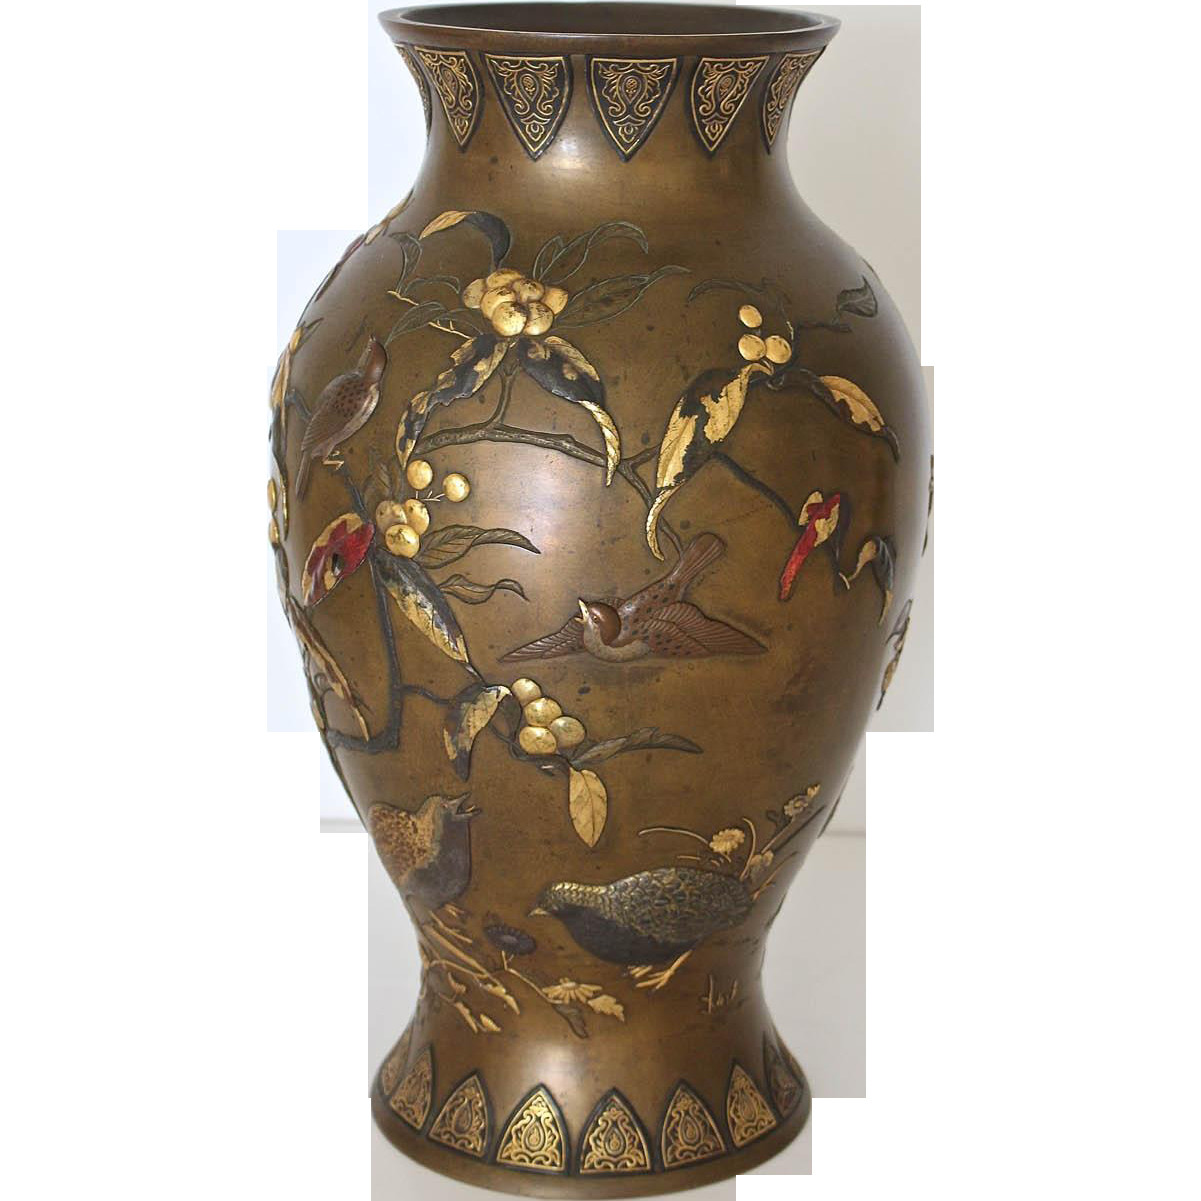 15 Recommended oriental Accent Vase 2024 free download oriental accent vase of magnificent taisho period japanese mixed metal bronze vase regarding ed76f642d3e2bde21f73035f8e0cd5d7